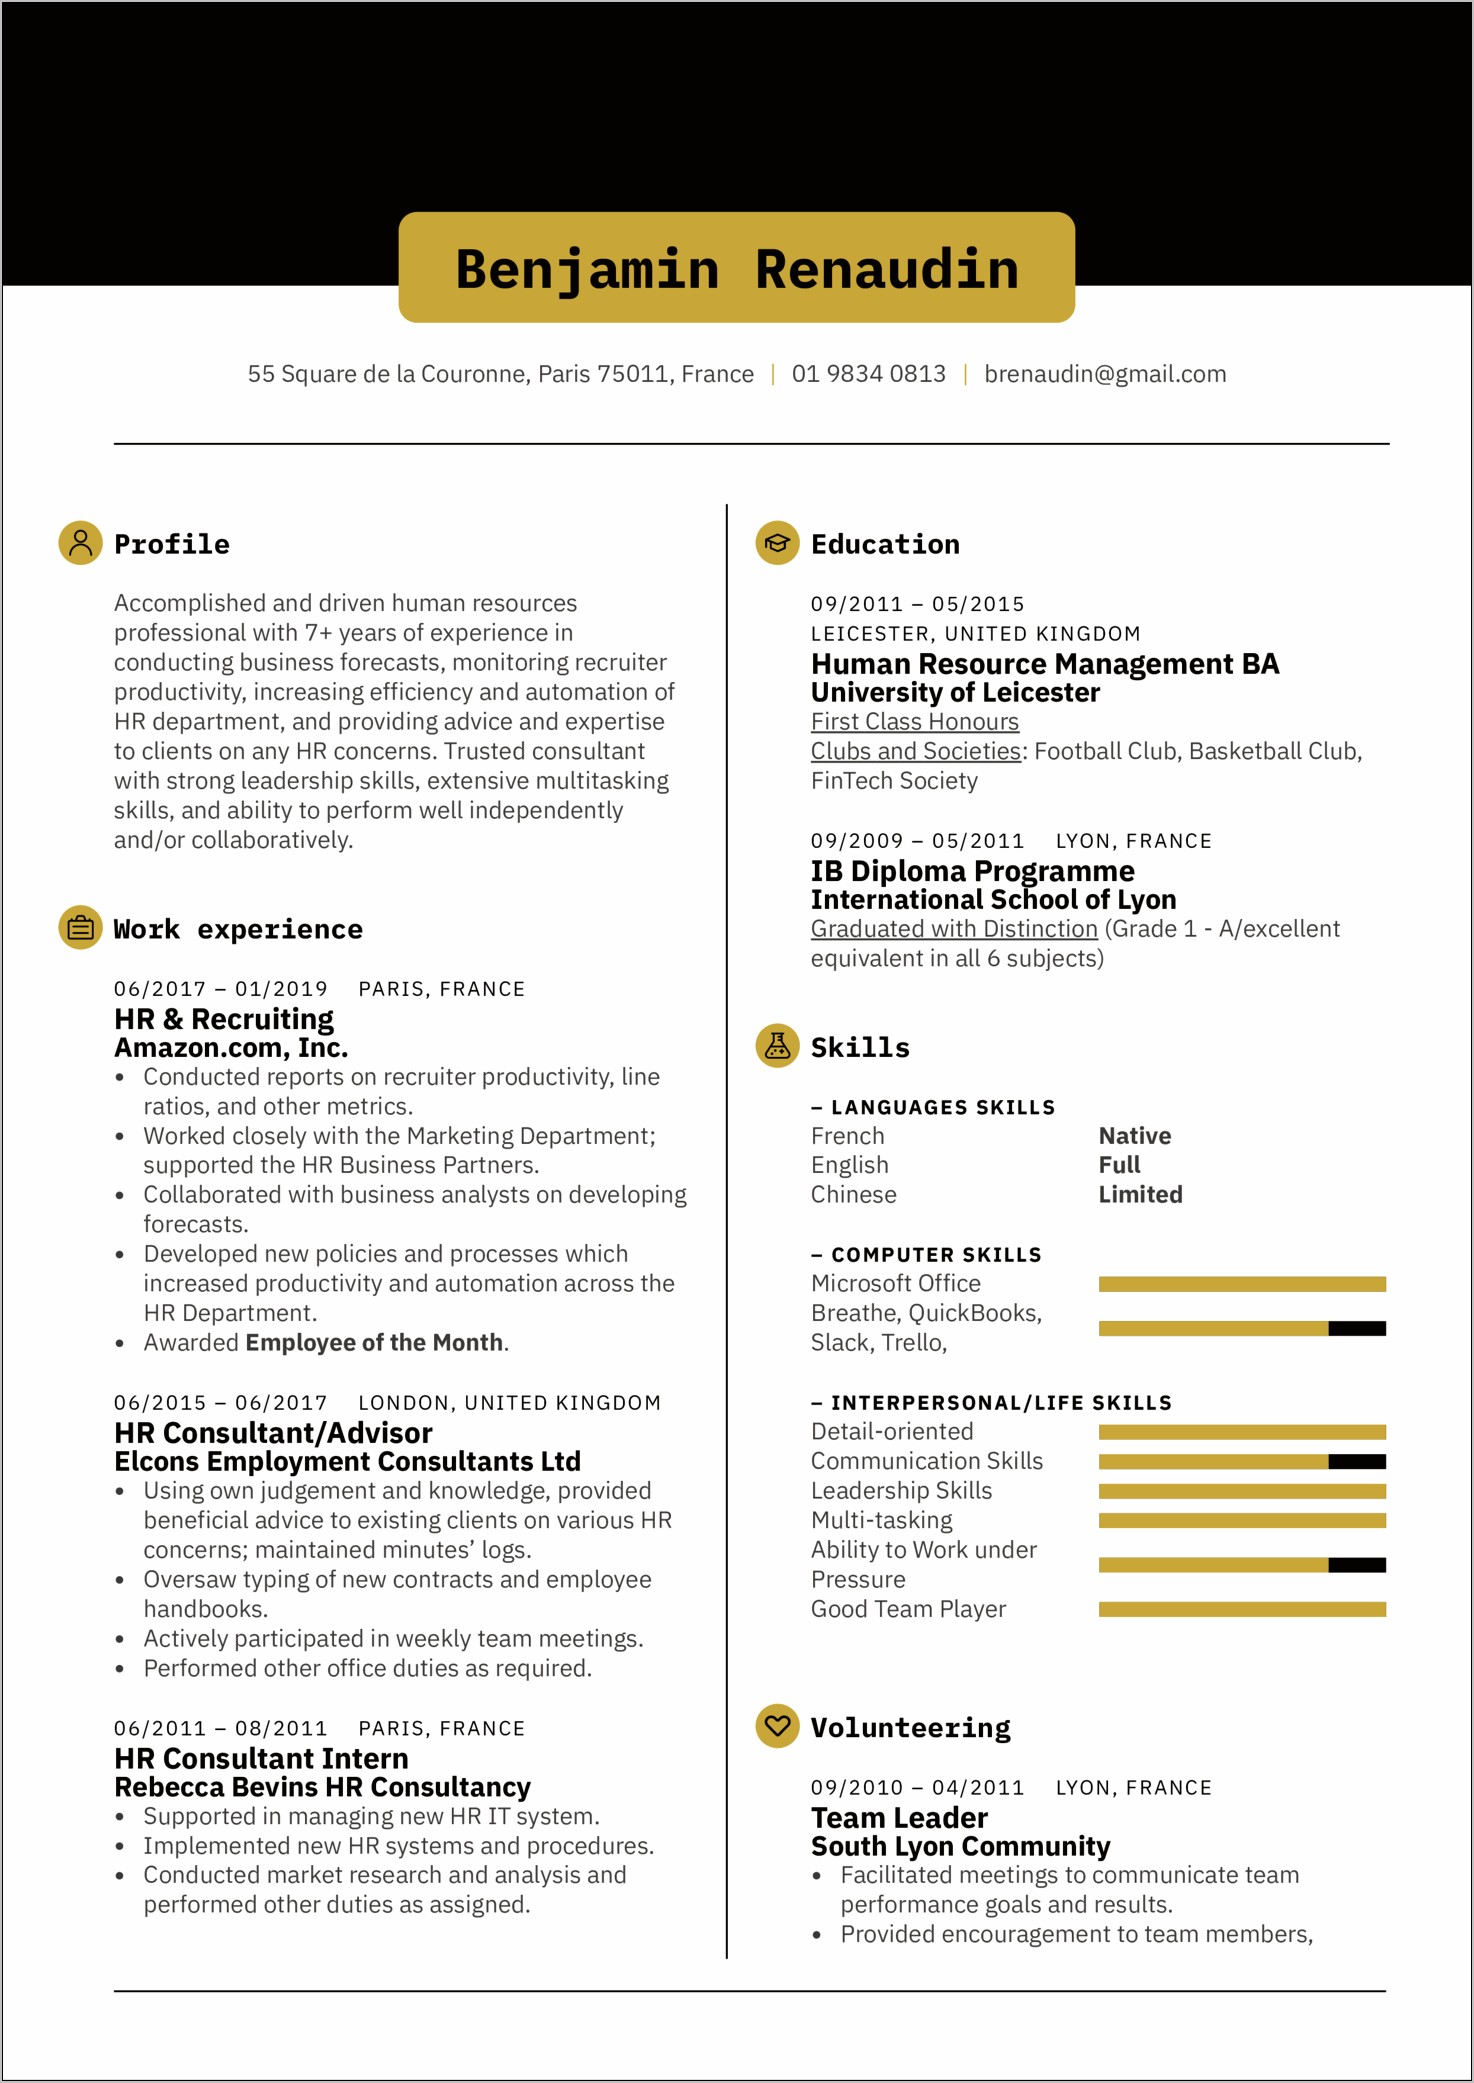 Resume Objective For Management Consulting